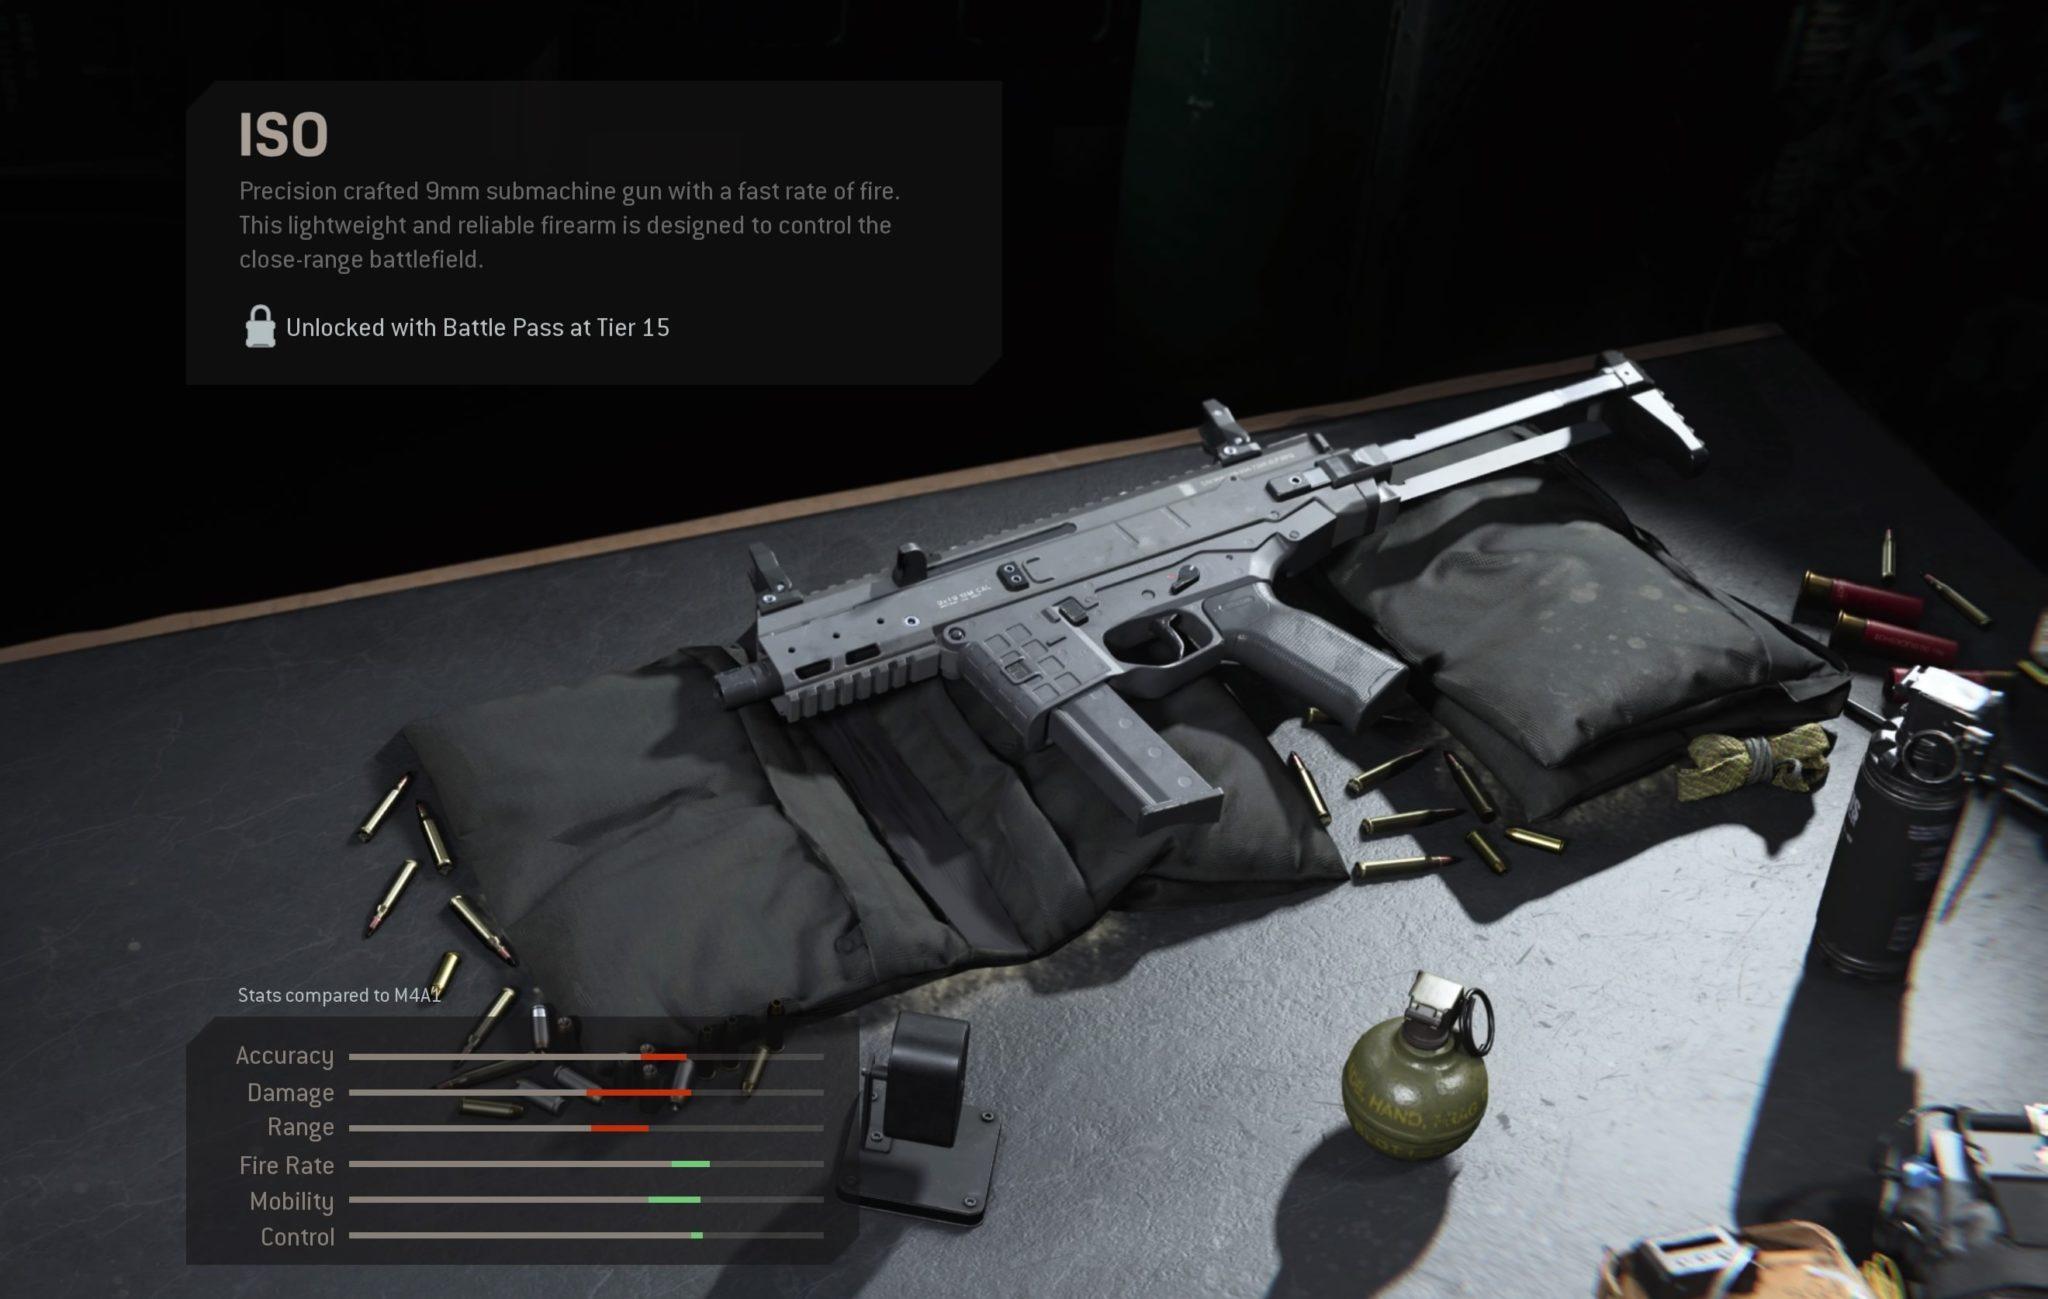 The ISO submachine gun as it appears in the Modern Wafare armory.